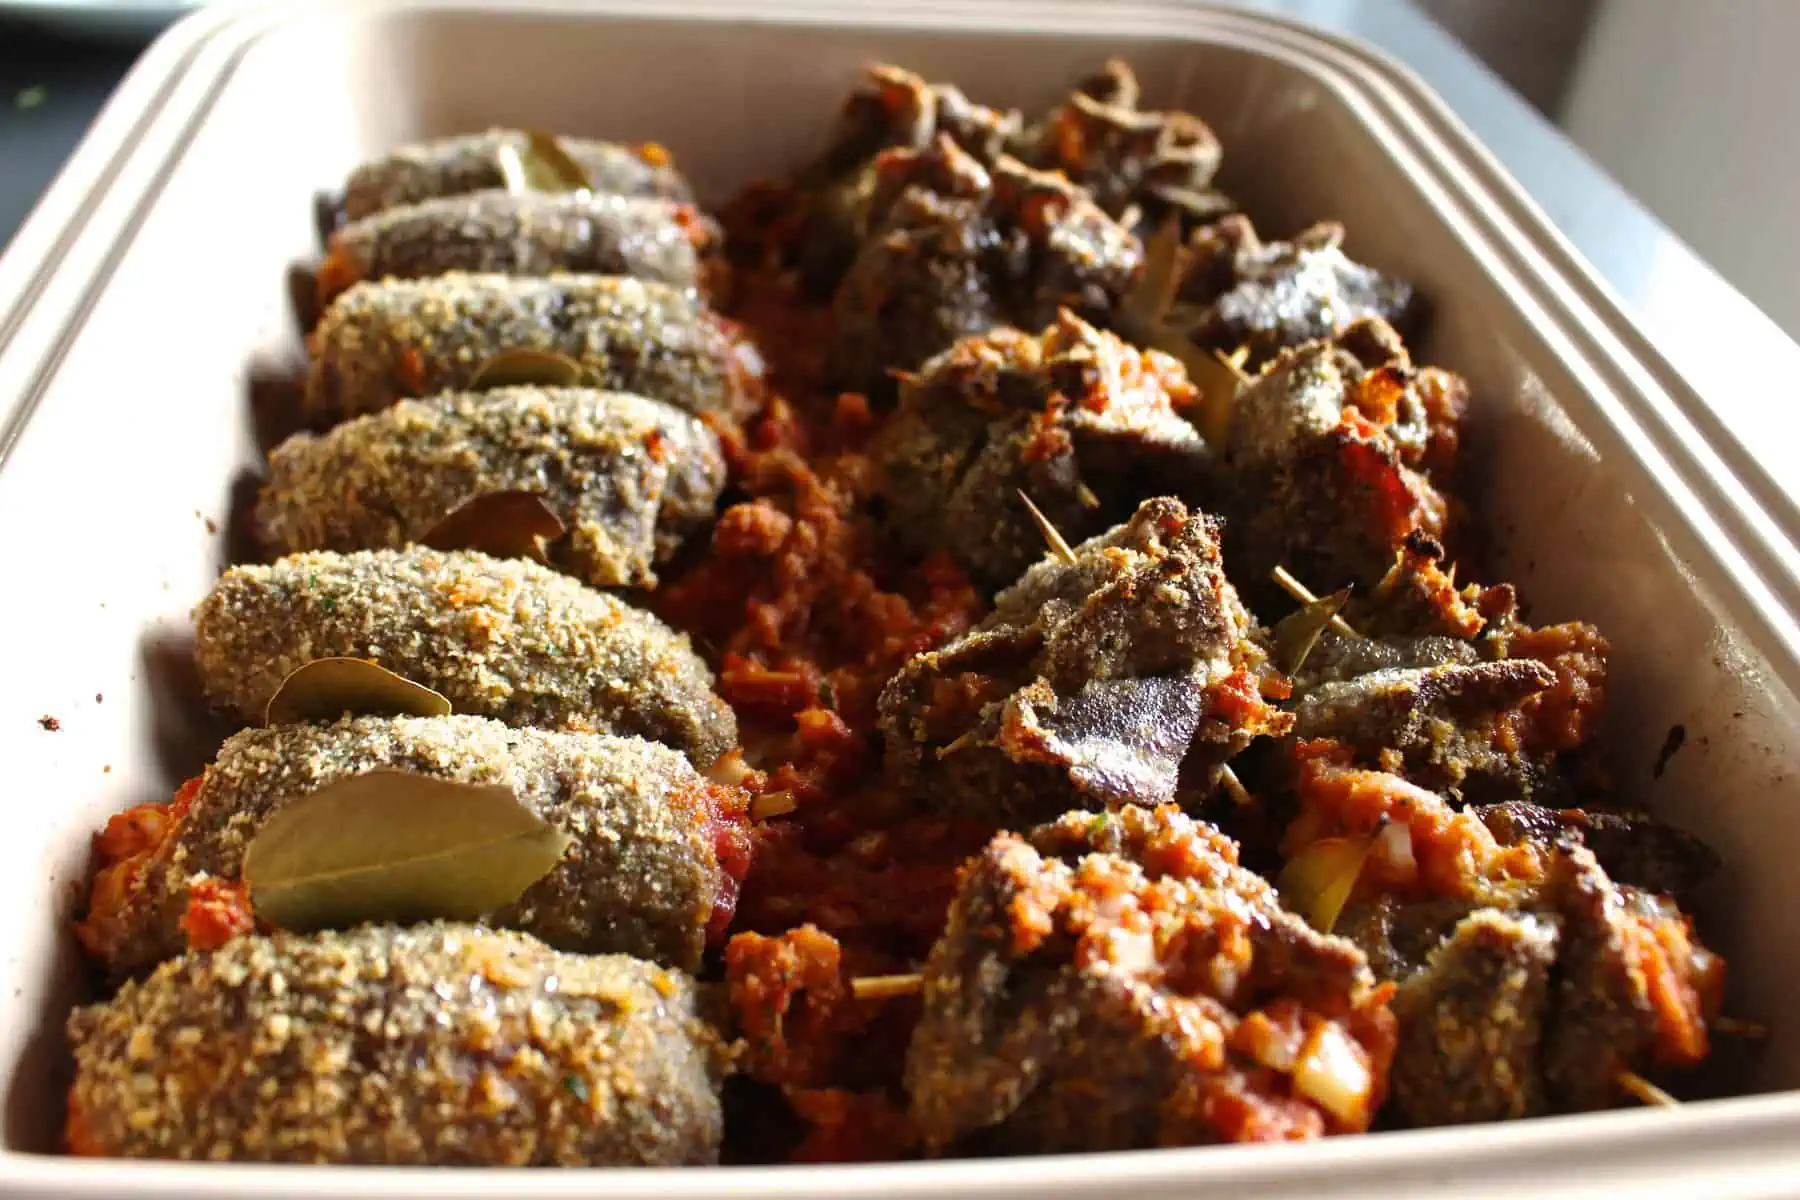 Thinly sliced beef wrapped around stuffed tomatoes in a baking dish.